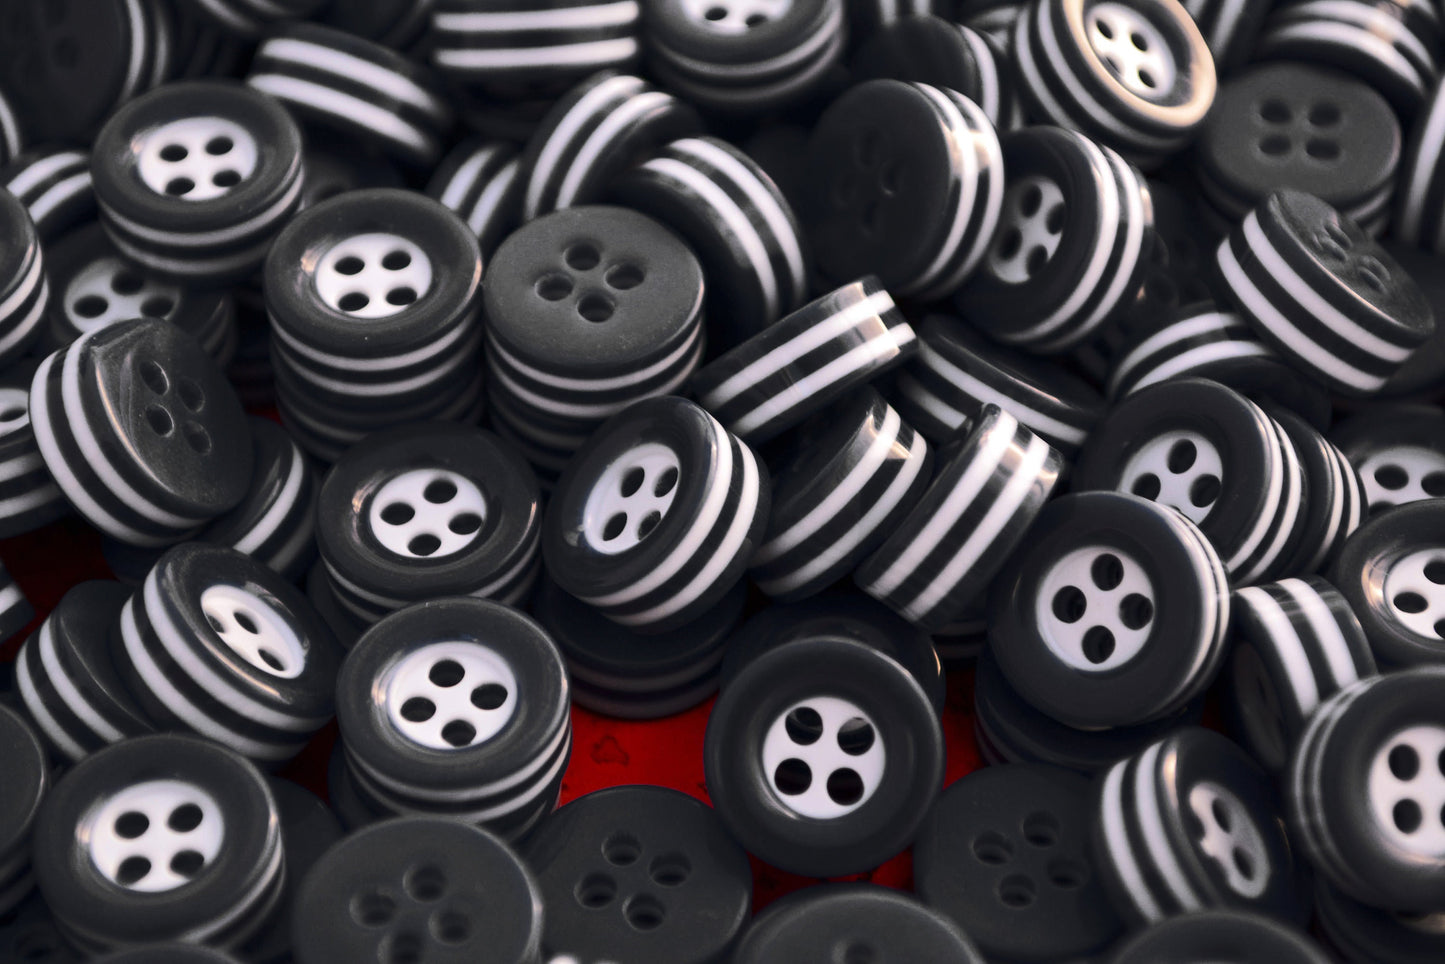 20 white and black STRIPED BUTTONS - 5mm thick! - choose from sizes 18L 16L - great quality - Made in ITALY